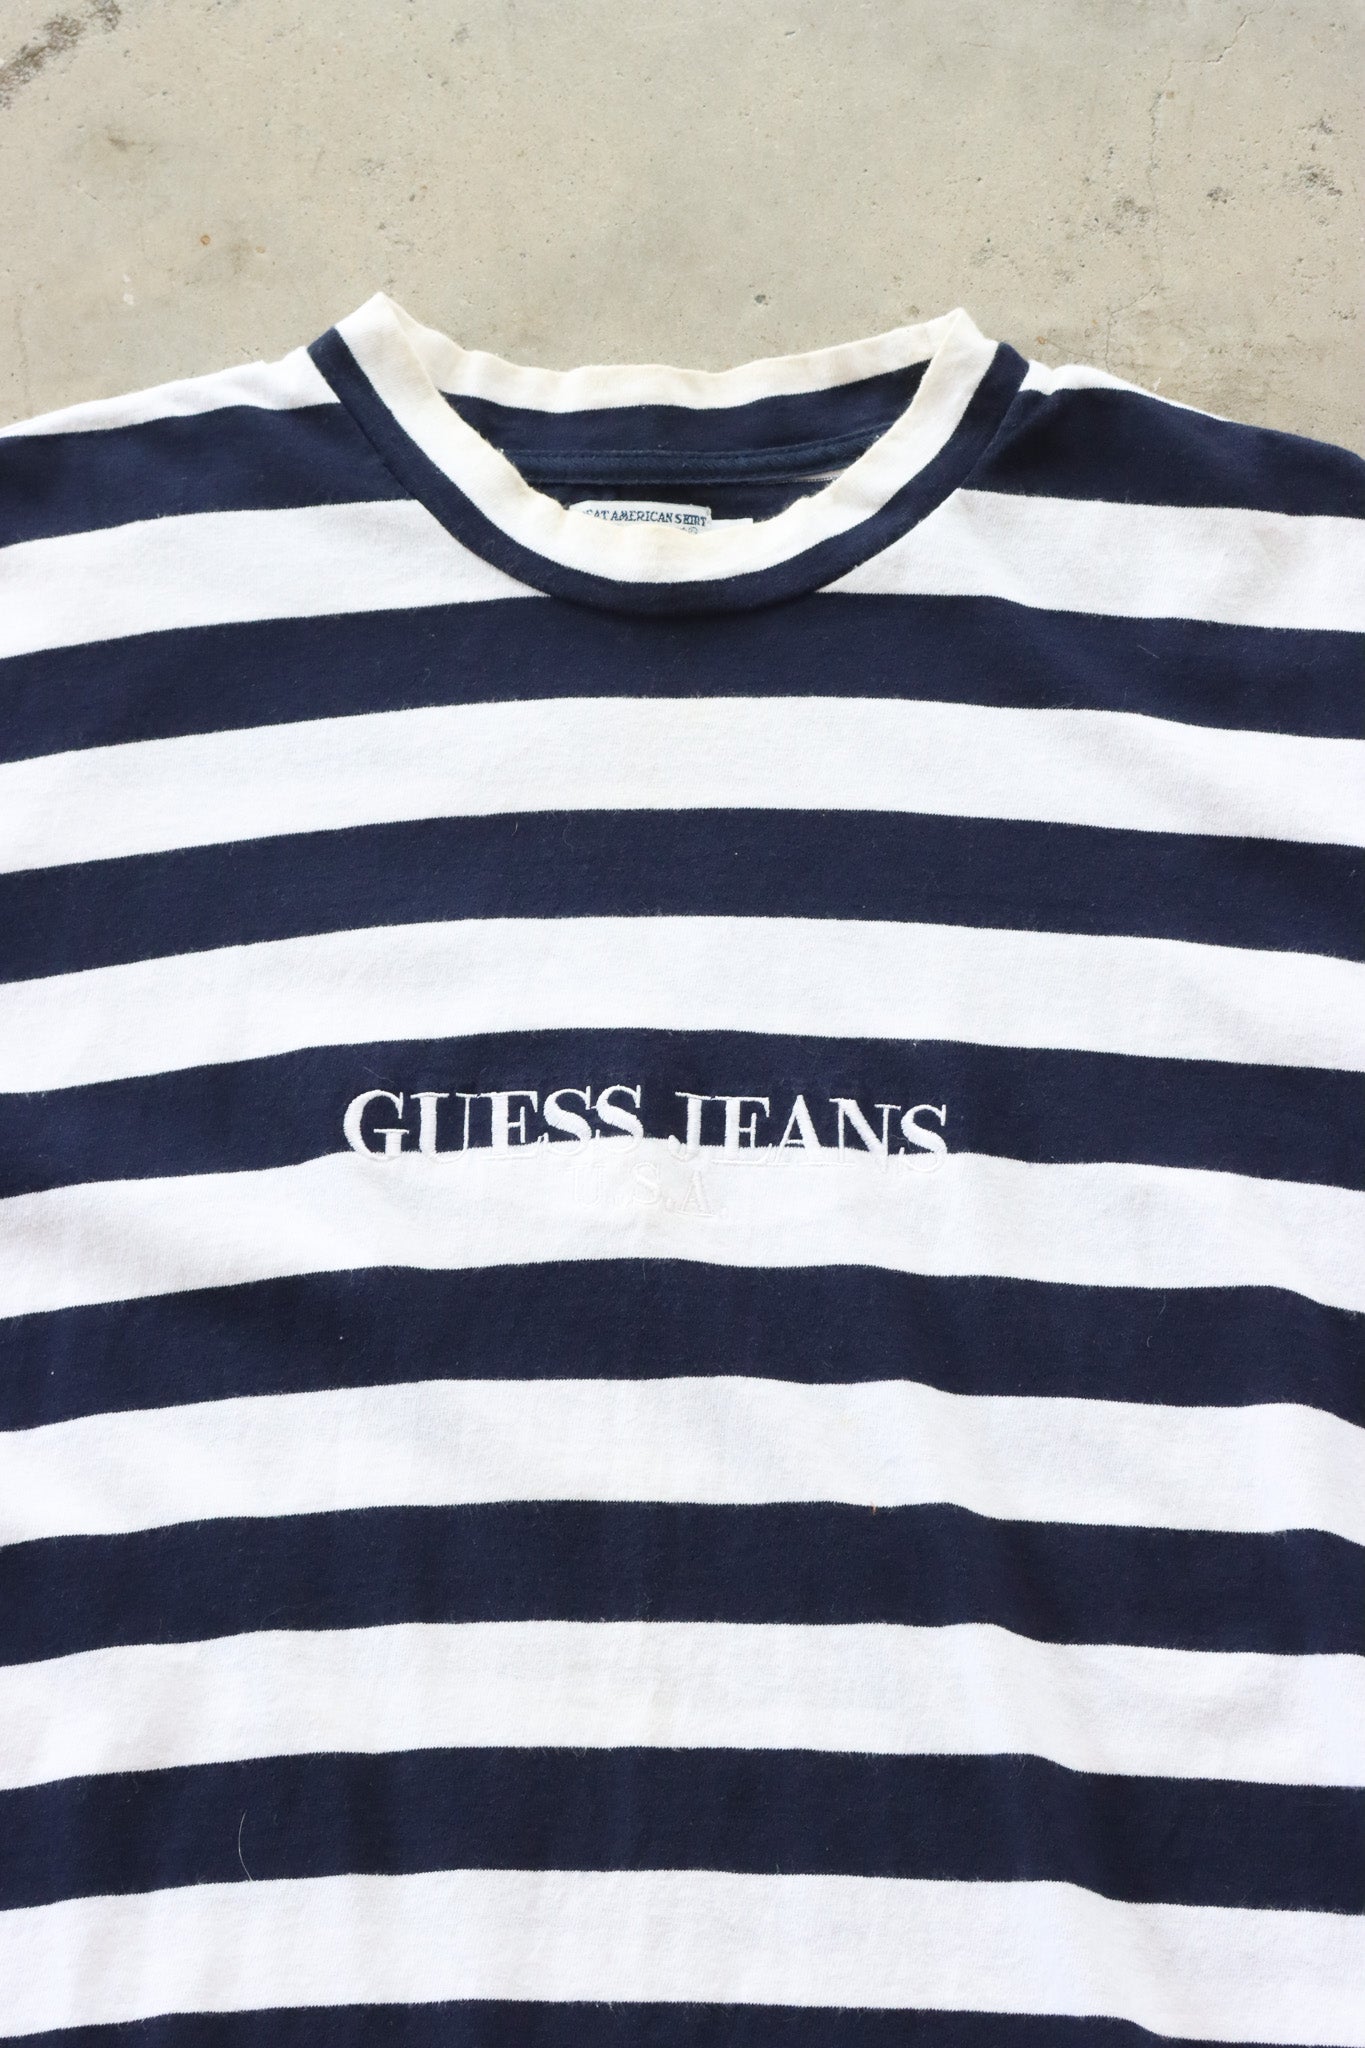 Vintage Guess Jeans USA Tee XL